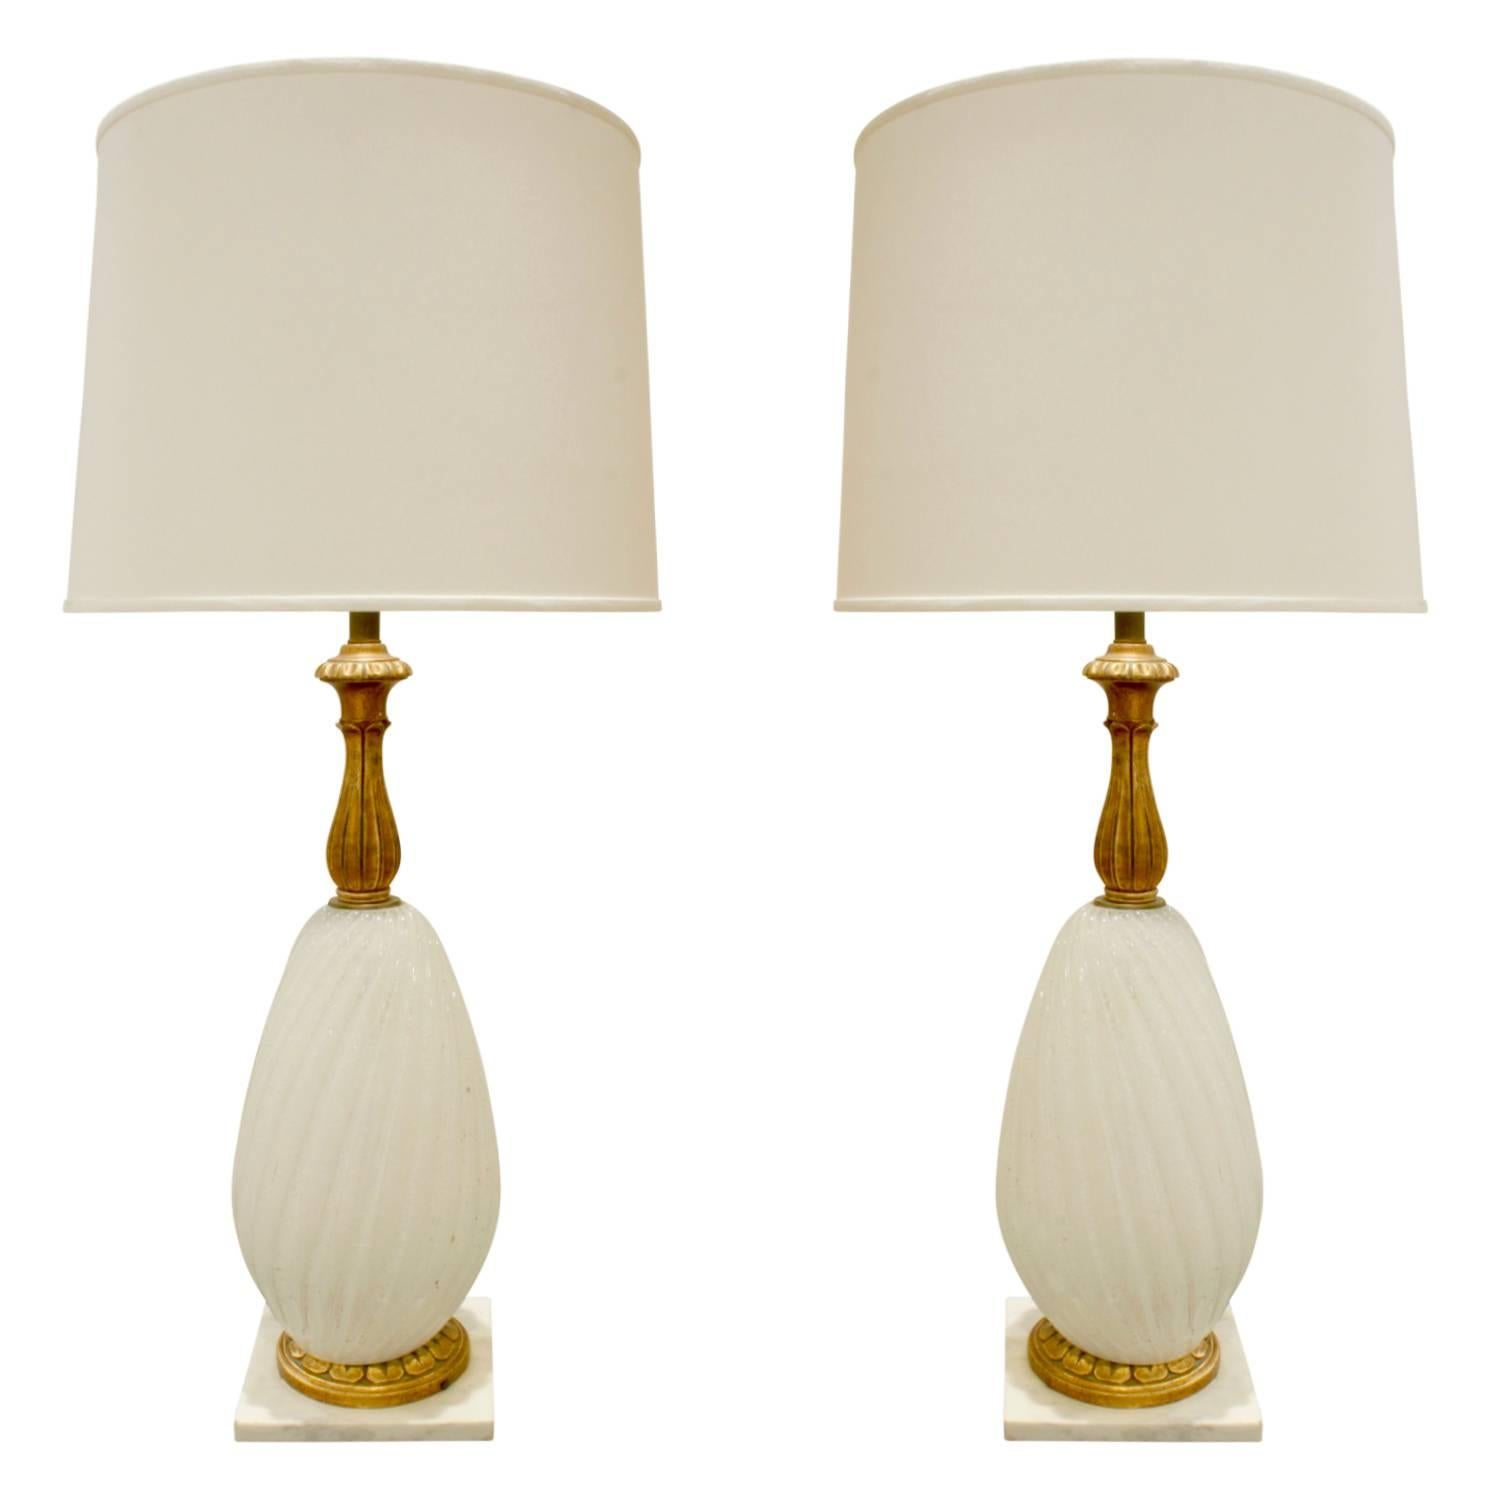 Seguso Pair of Gilded Handblown Glass Table Lamps, 1950s